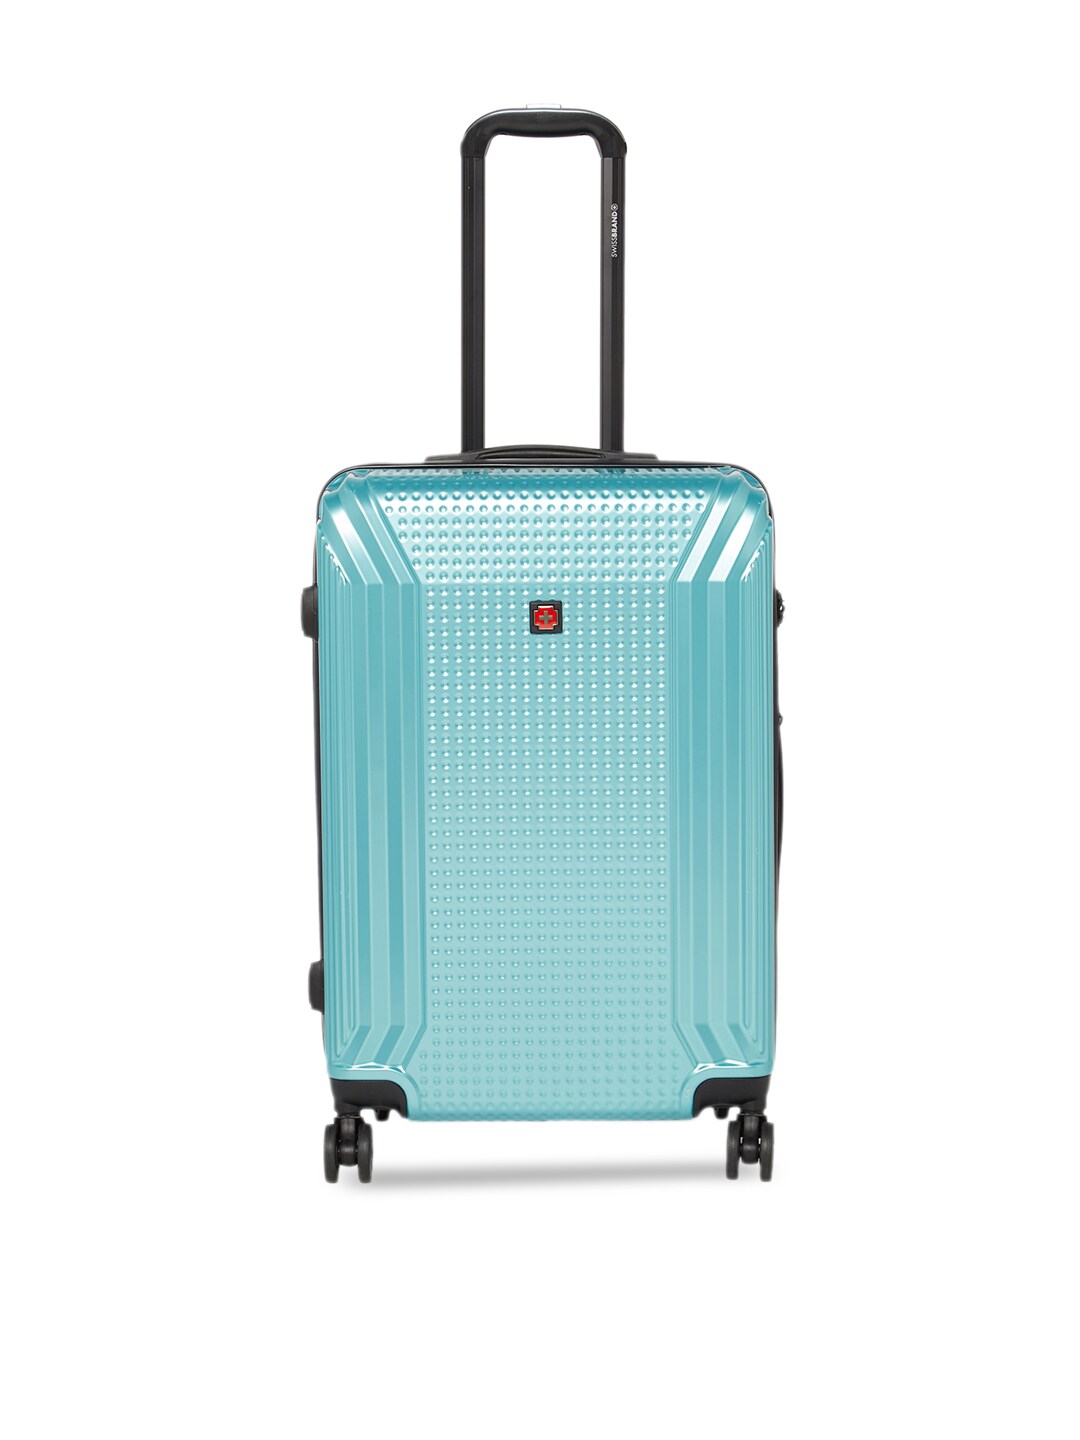 SWISS BRAND Green Textured VERNIER 360-Degree Rotation Hard-Sided Medium Trolley Suitcase Price in India